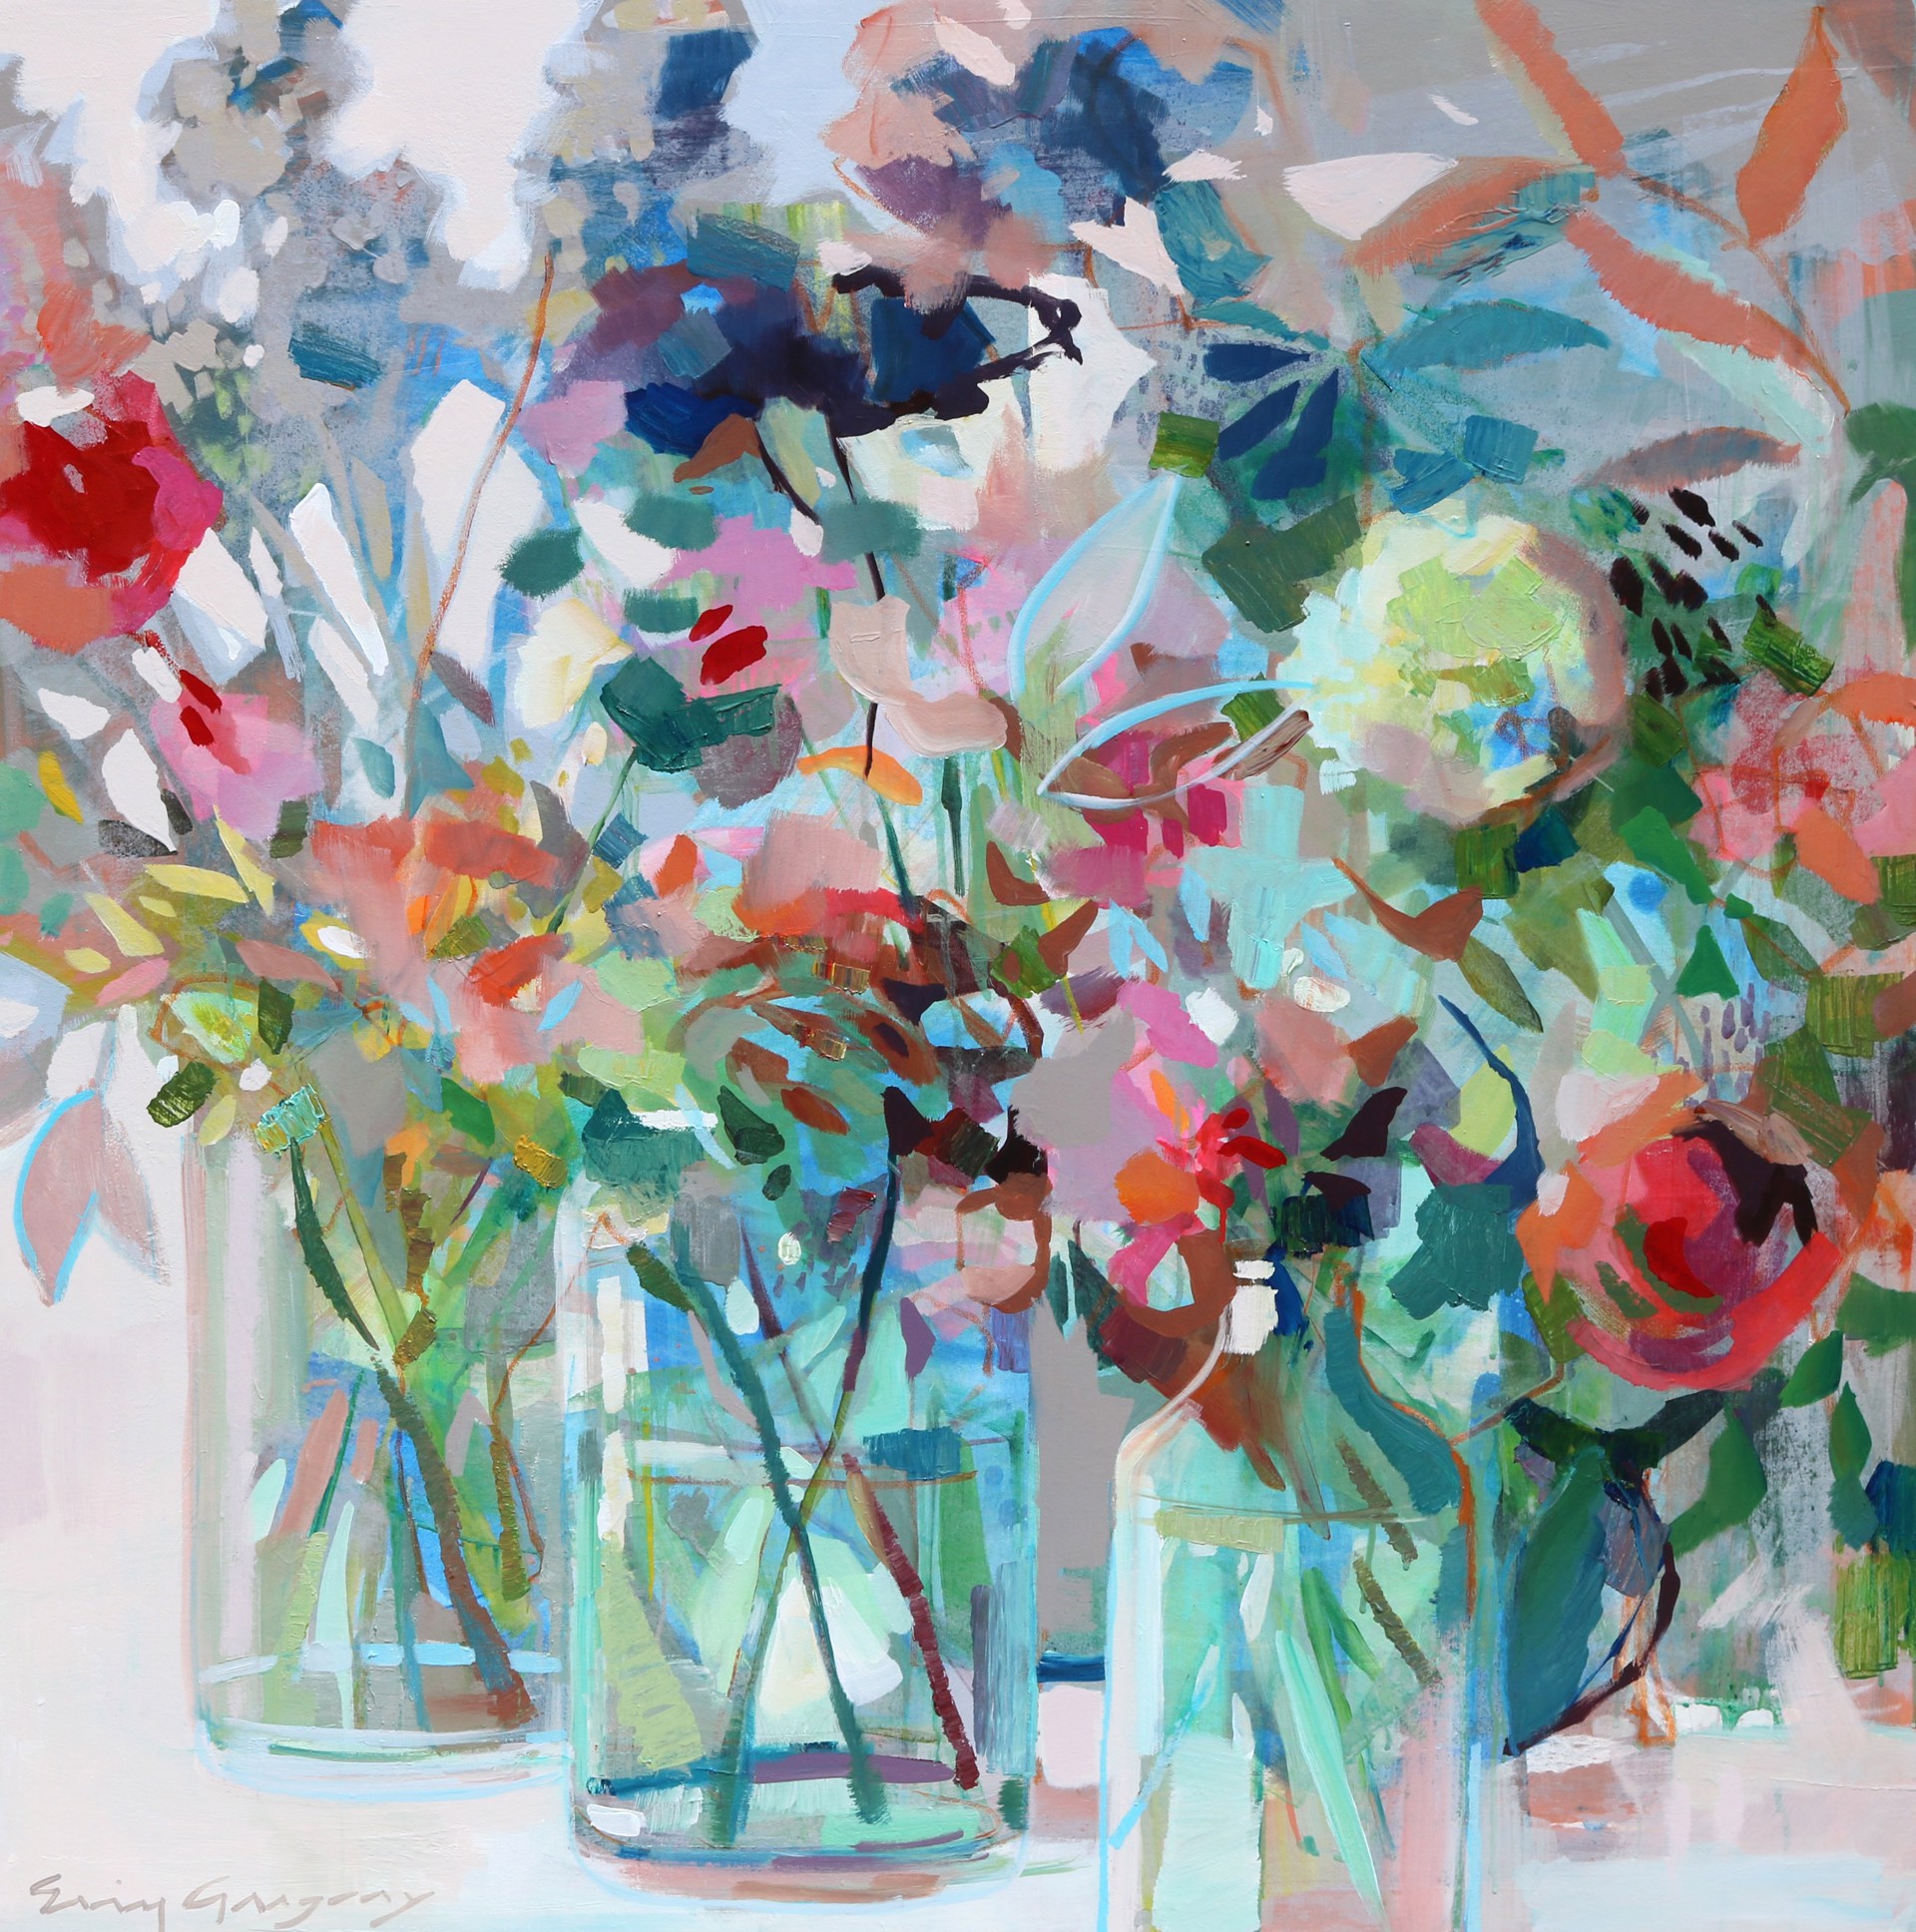 The Promise of Summer 4 {SOLD} by Erin Gregory